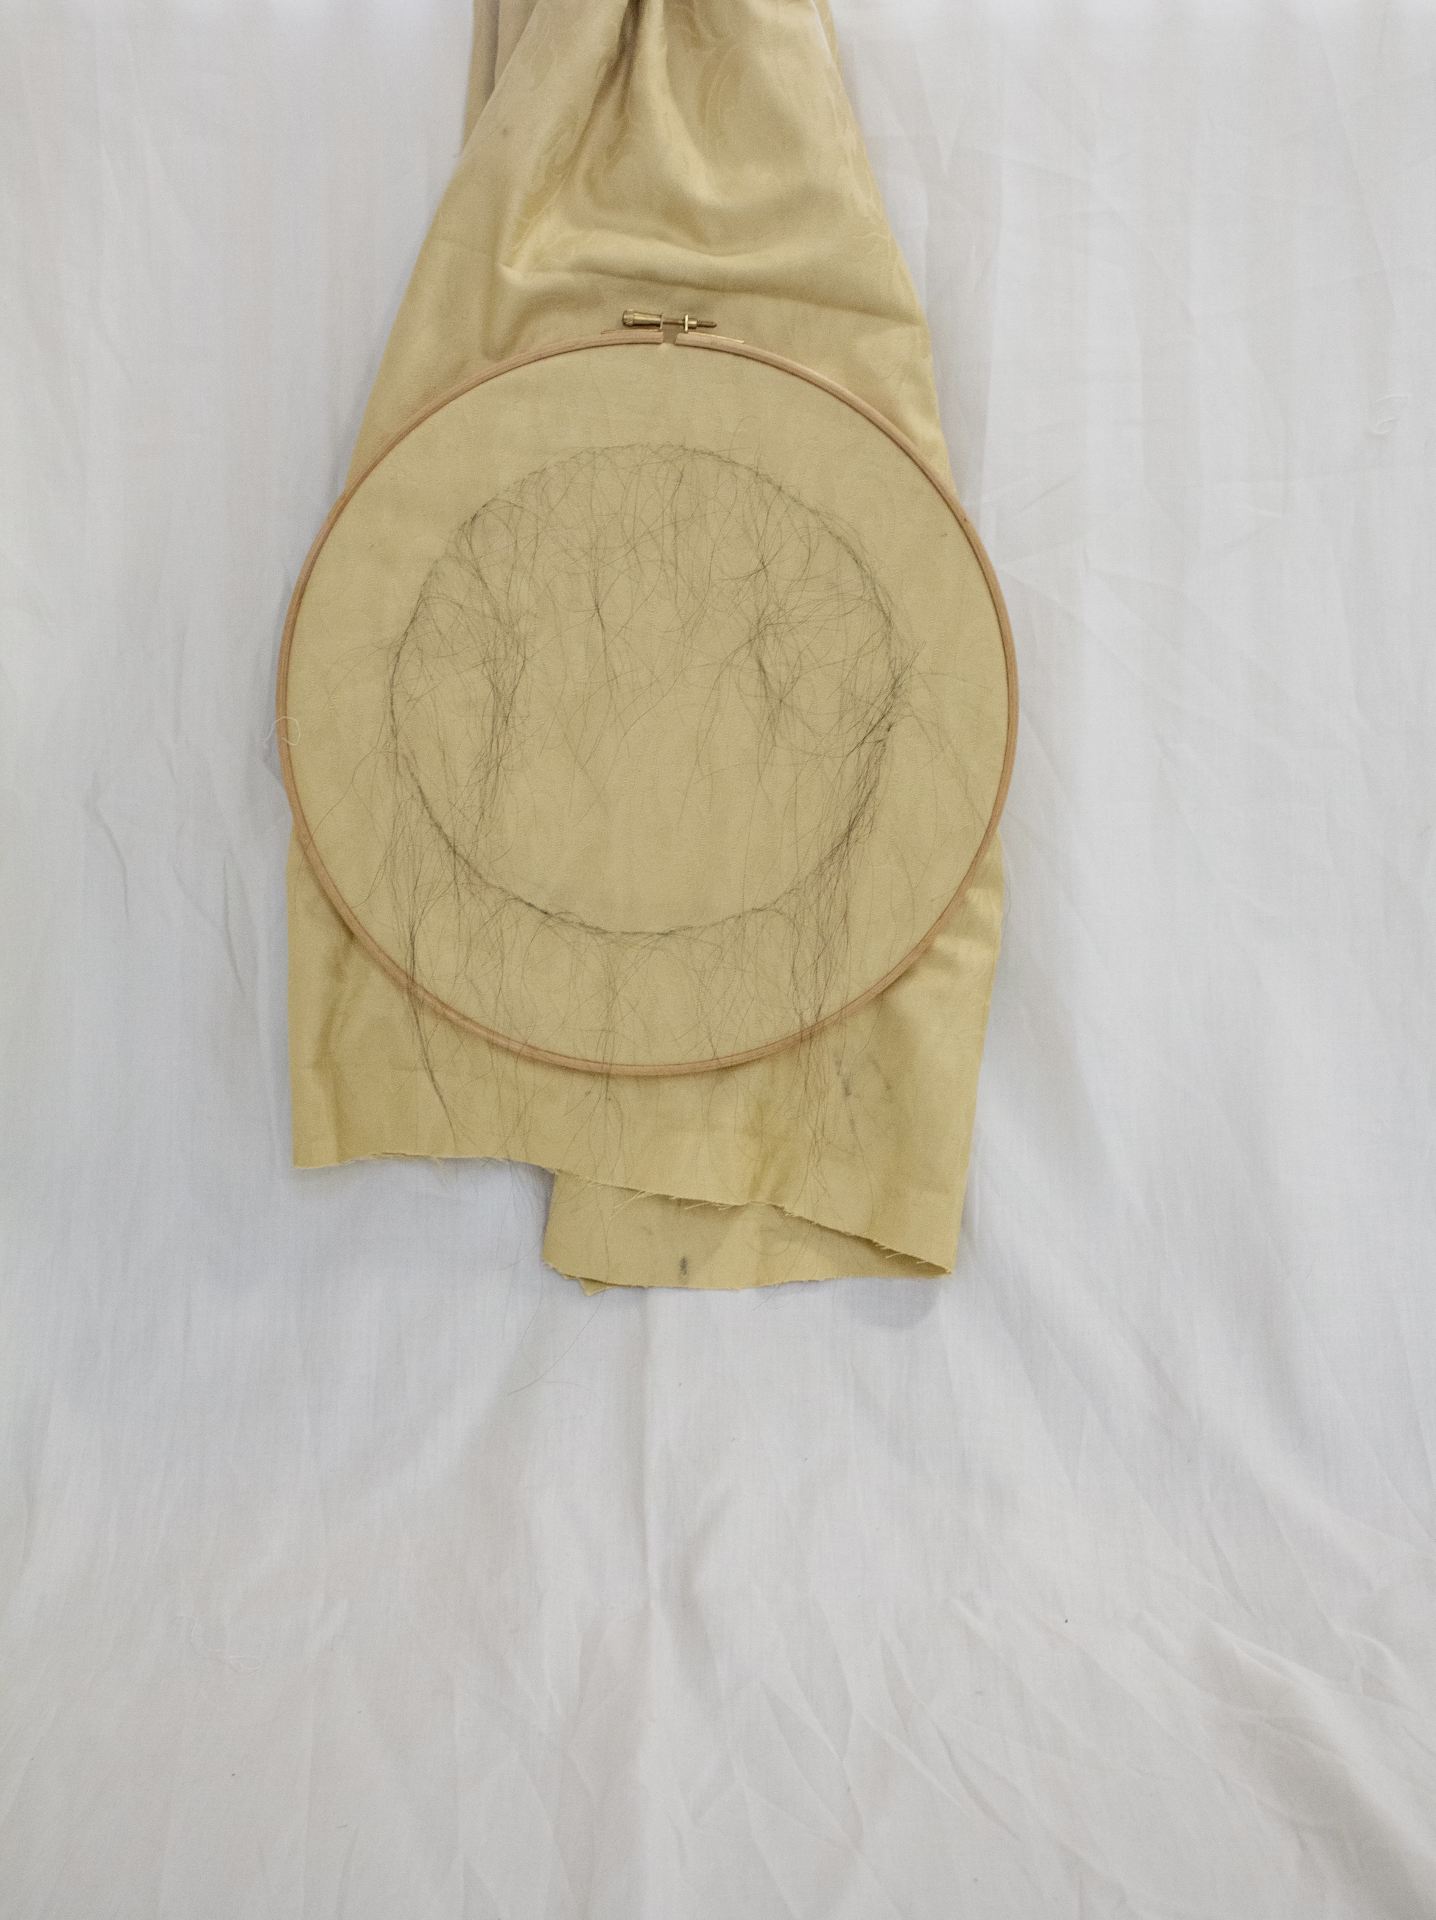 An image of a piece of yellow fabric in a stretching ring, set against a white background. There are several strands of dark hair that have been sewn in a circle on the fabric. 